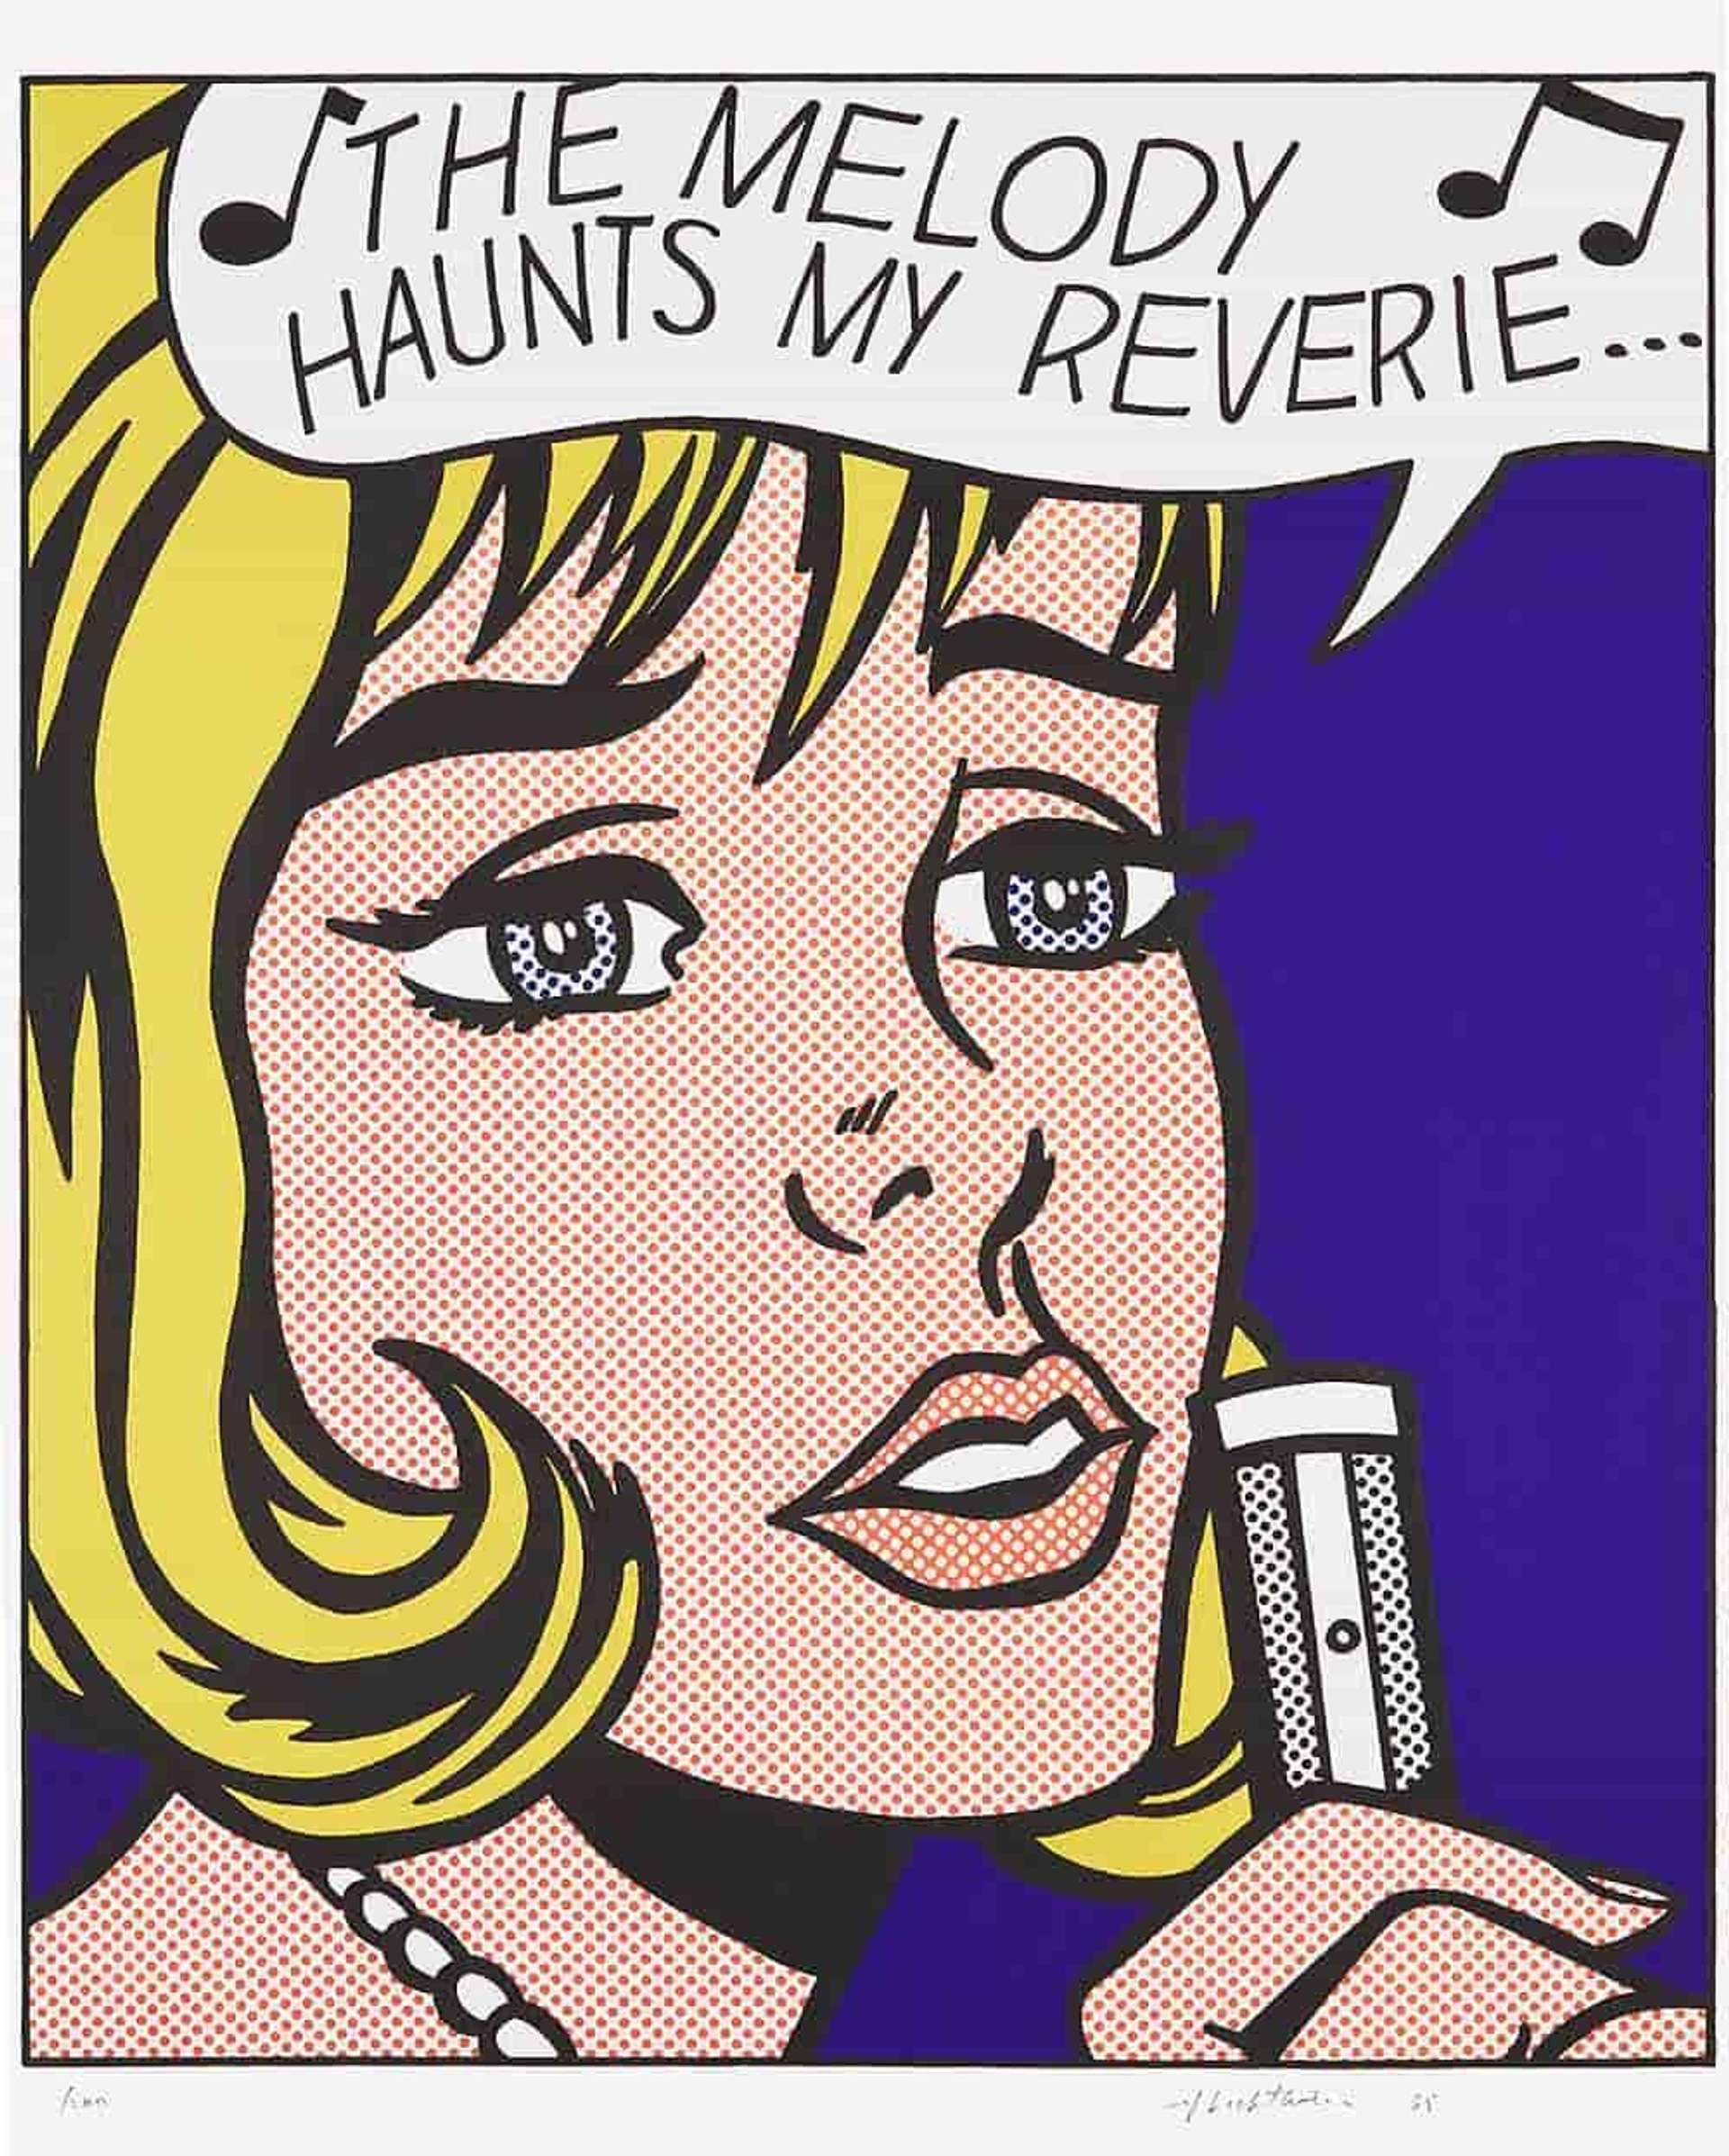 Reverie references Mitchell Parish's lyrics, written for the 1927 love ballad "Stardust" by Hoagy Carmichael. Accordingly, Lichtenstein presents a melancholy cartoon portrait of a blonde crooner, midsong. Reverie applies a simple, yet disruptive visual vocabulary, one characteristic of advertisements and comic strips.